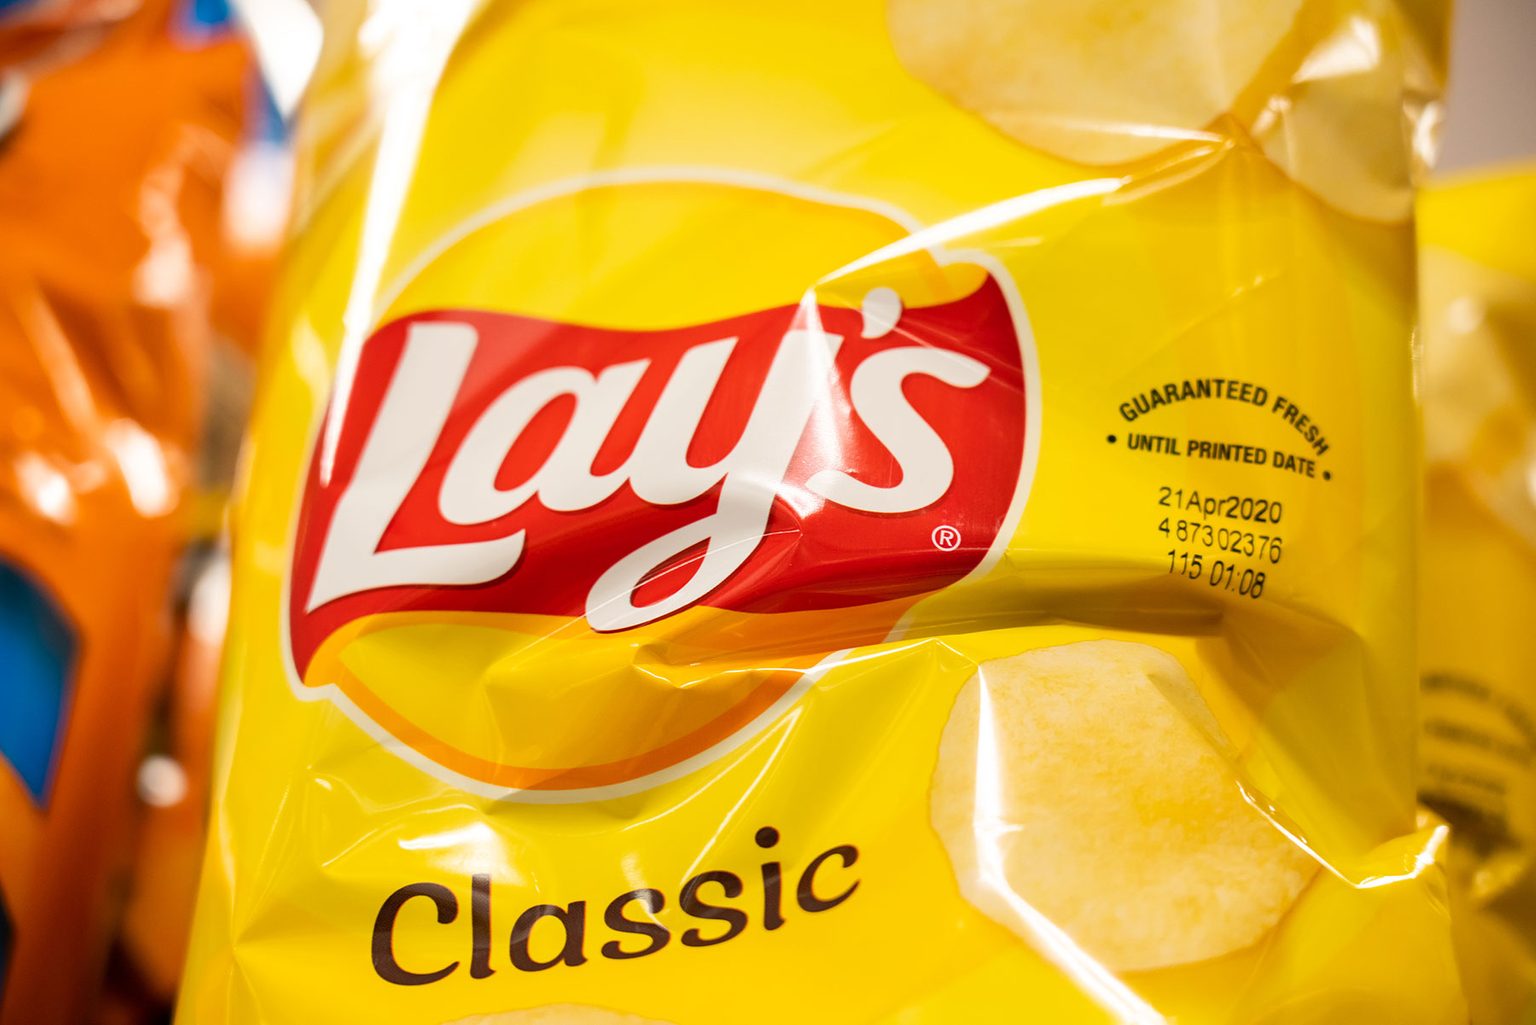 A FritoLay Chips Recall Affects Up to 4 States—Here's What We Know